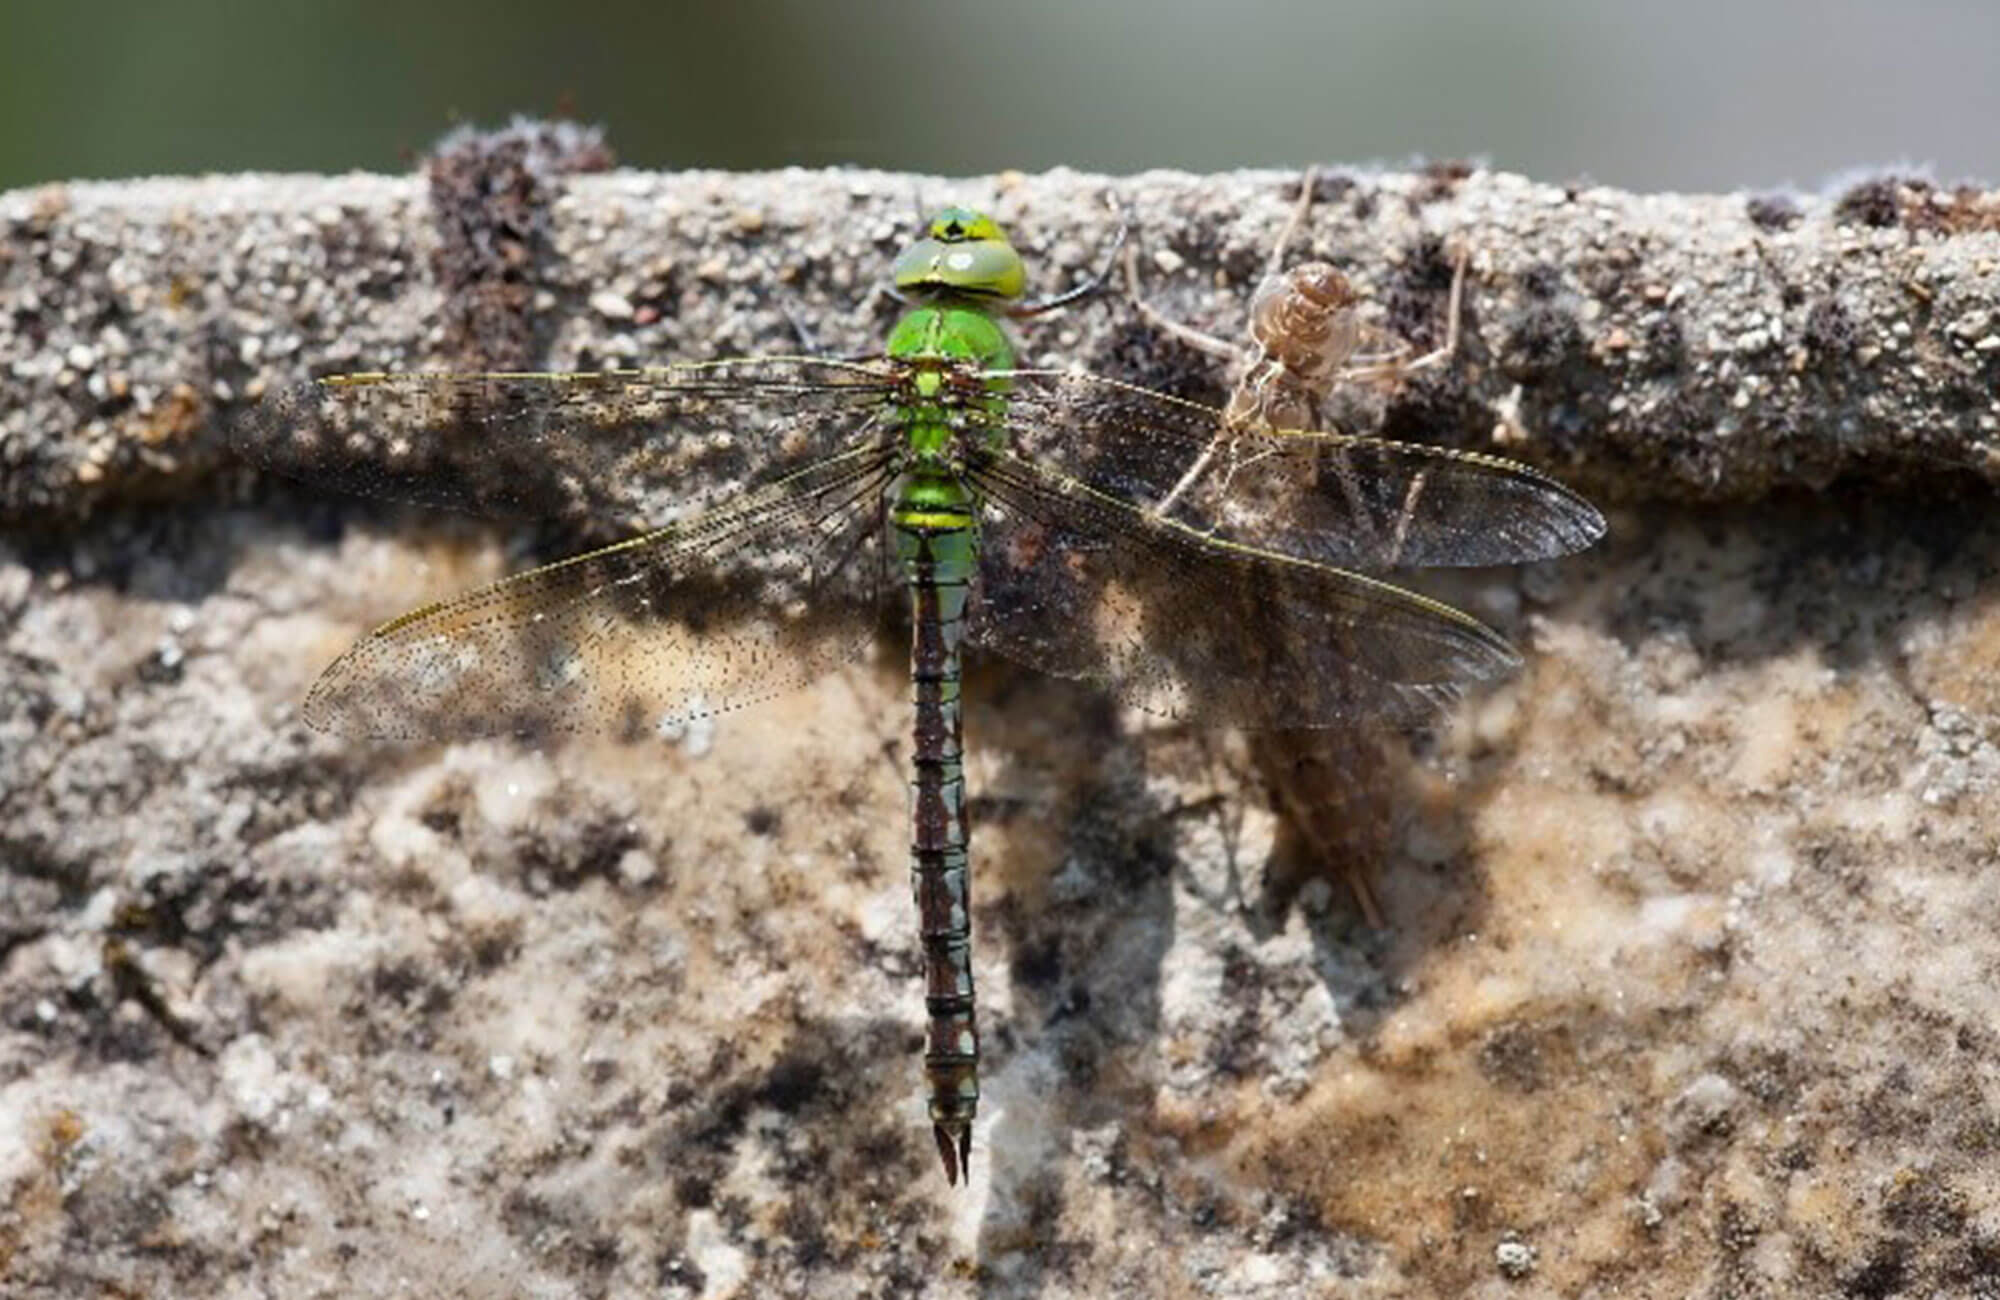 Dragonfly facts from the Dragonfly Society. Why we love Dragonflies.